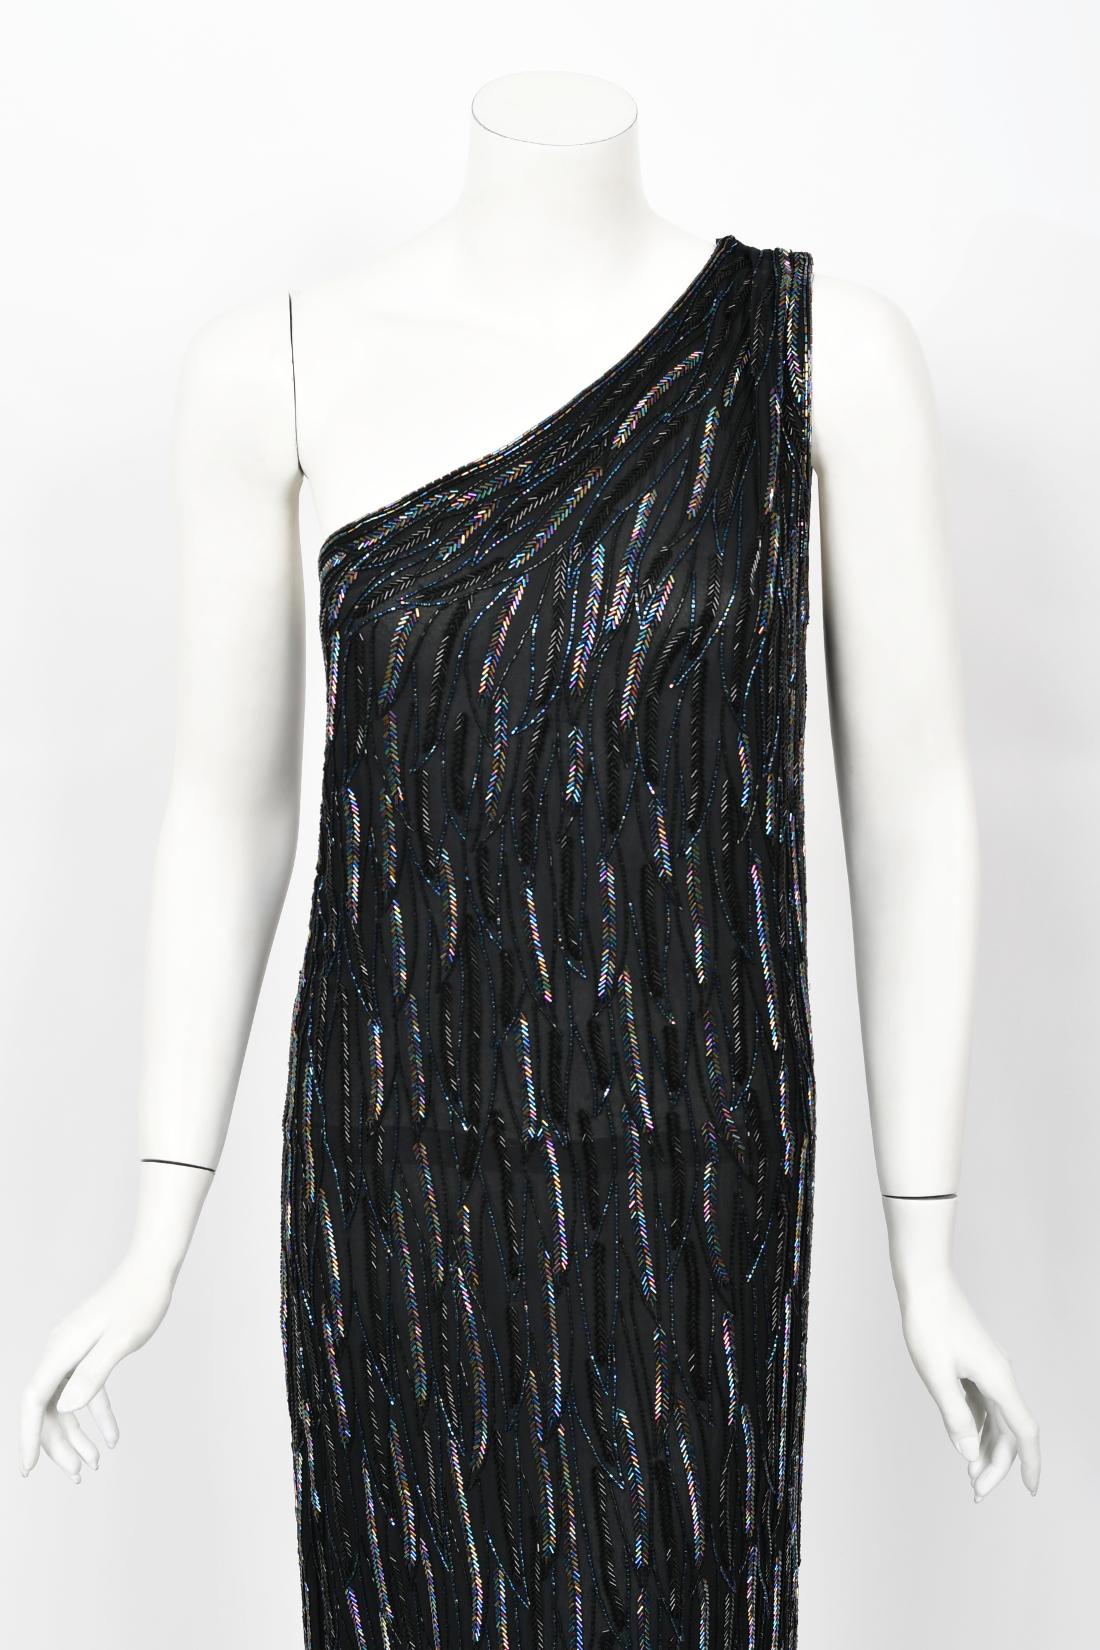 An absolutely stunning and highly desirable Halston couture fully beaded silk one-shoulder dress dating back to the mid 1970's. Halston revolutionized the way women dress and is one of the few designers, alongside Claire McCardell and Norman Norell,